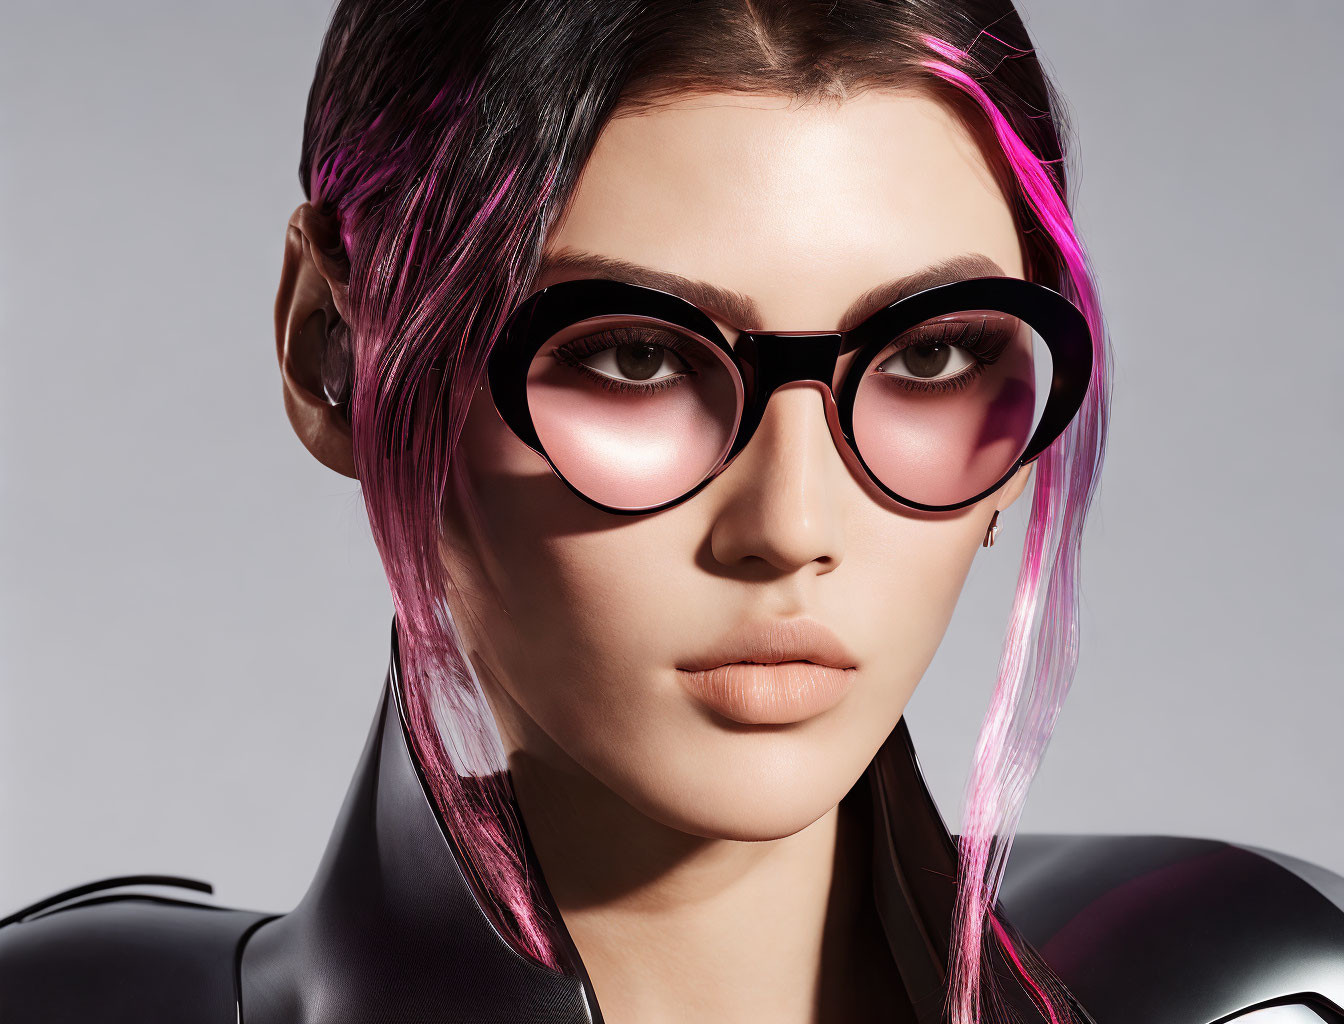 Woman with Pink Hair and Stylish Sunglasses in 3D Render